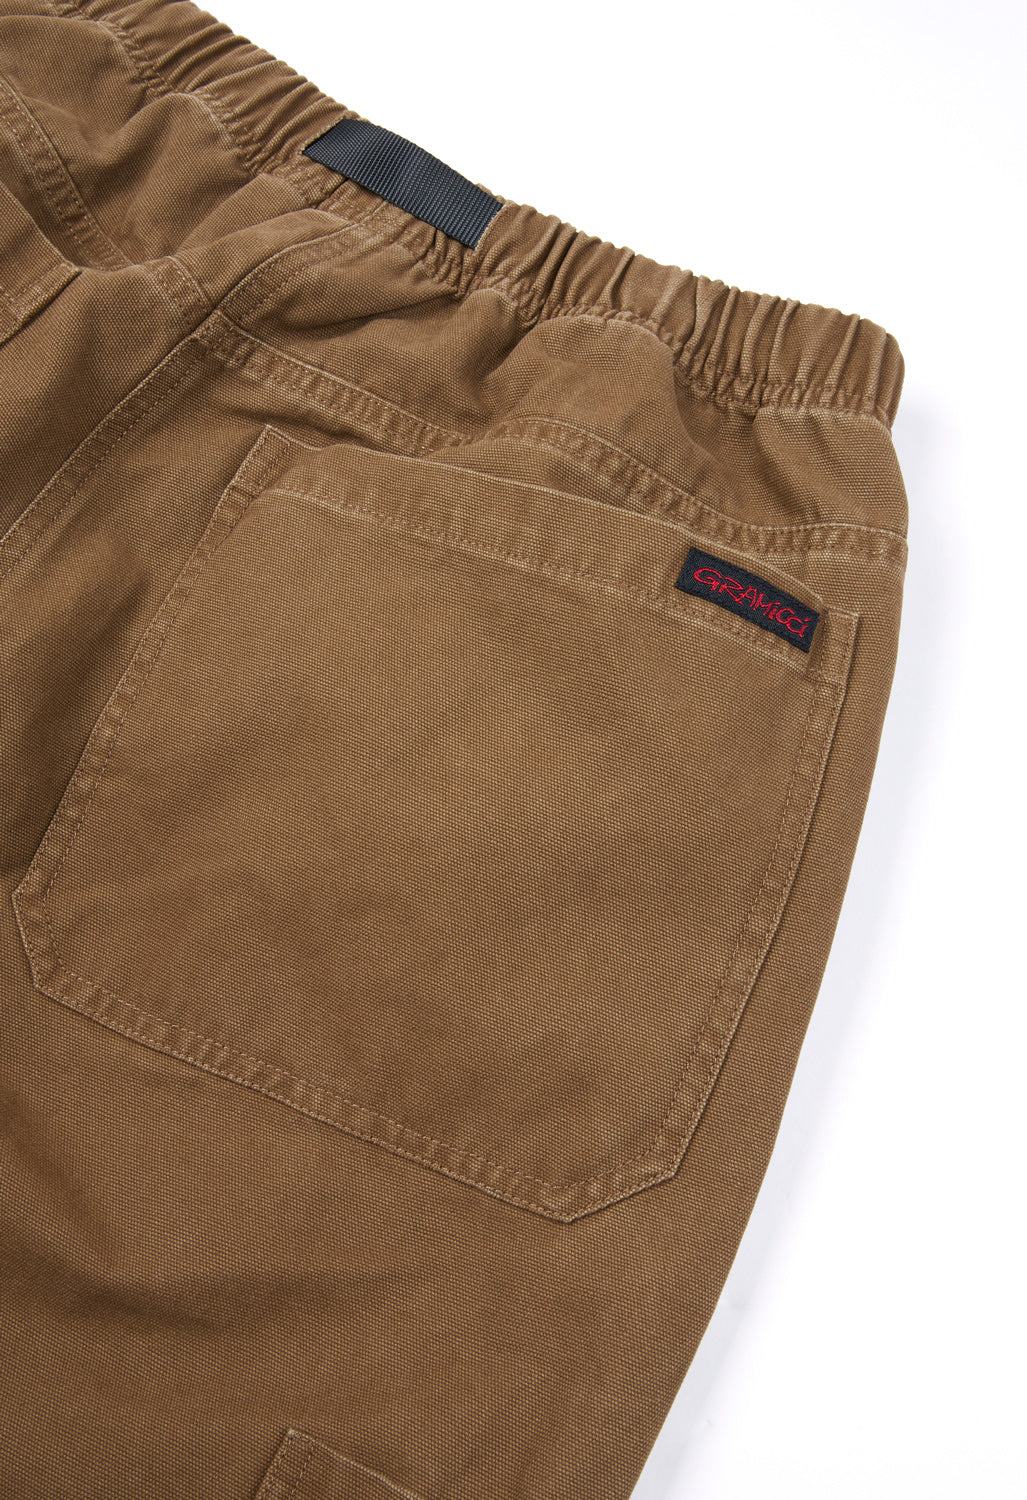 Gramicci Men's Canvas Double Knee Pants - Dusted Olive